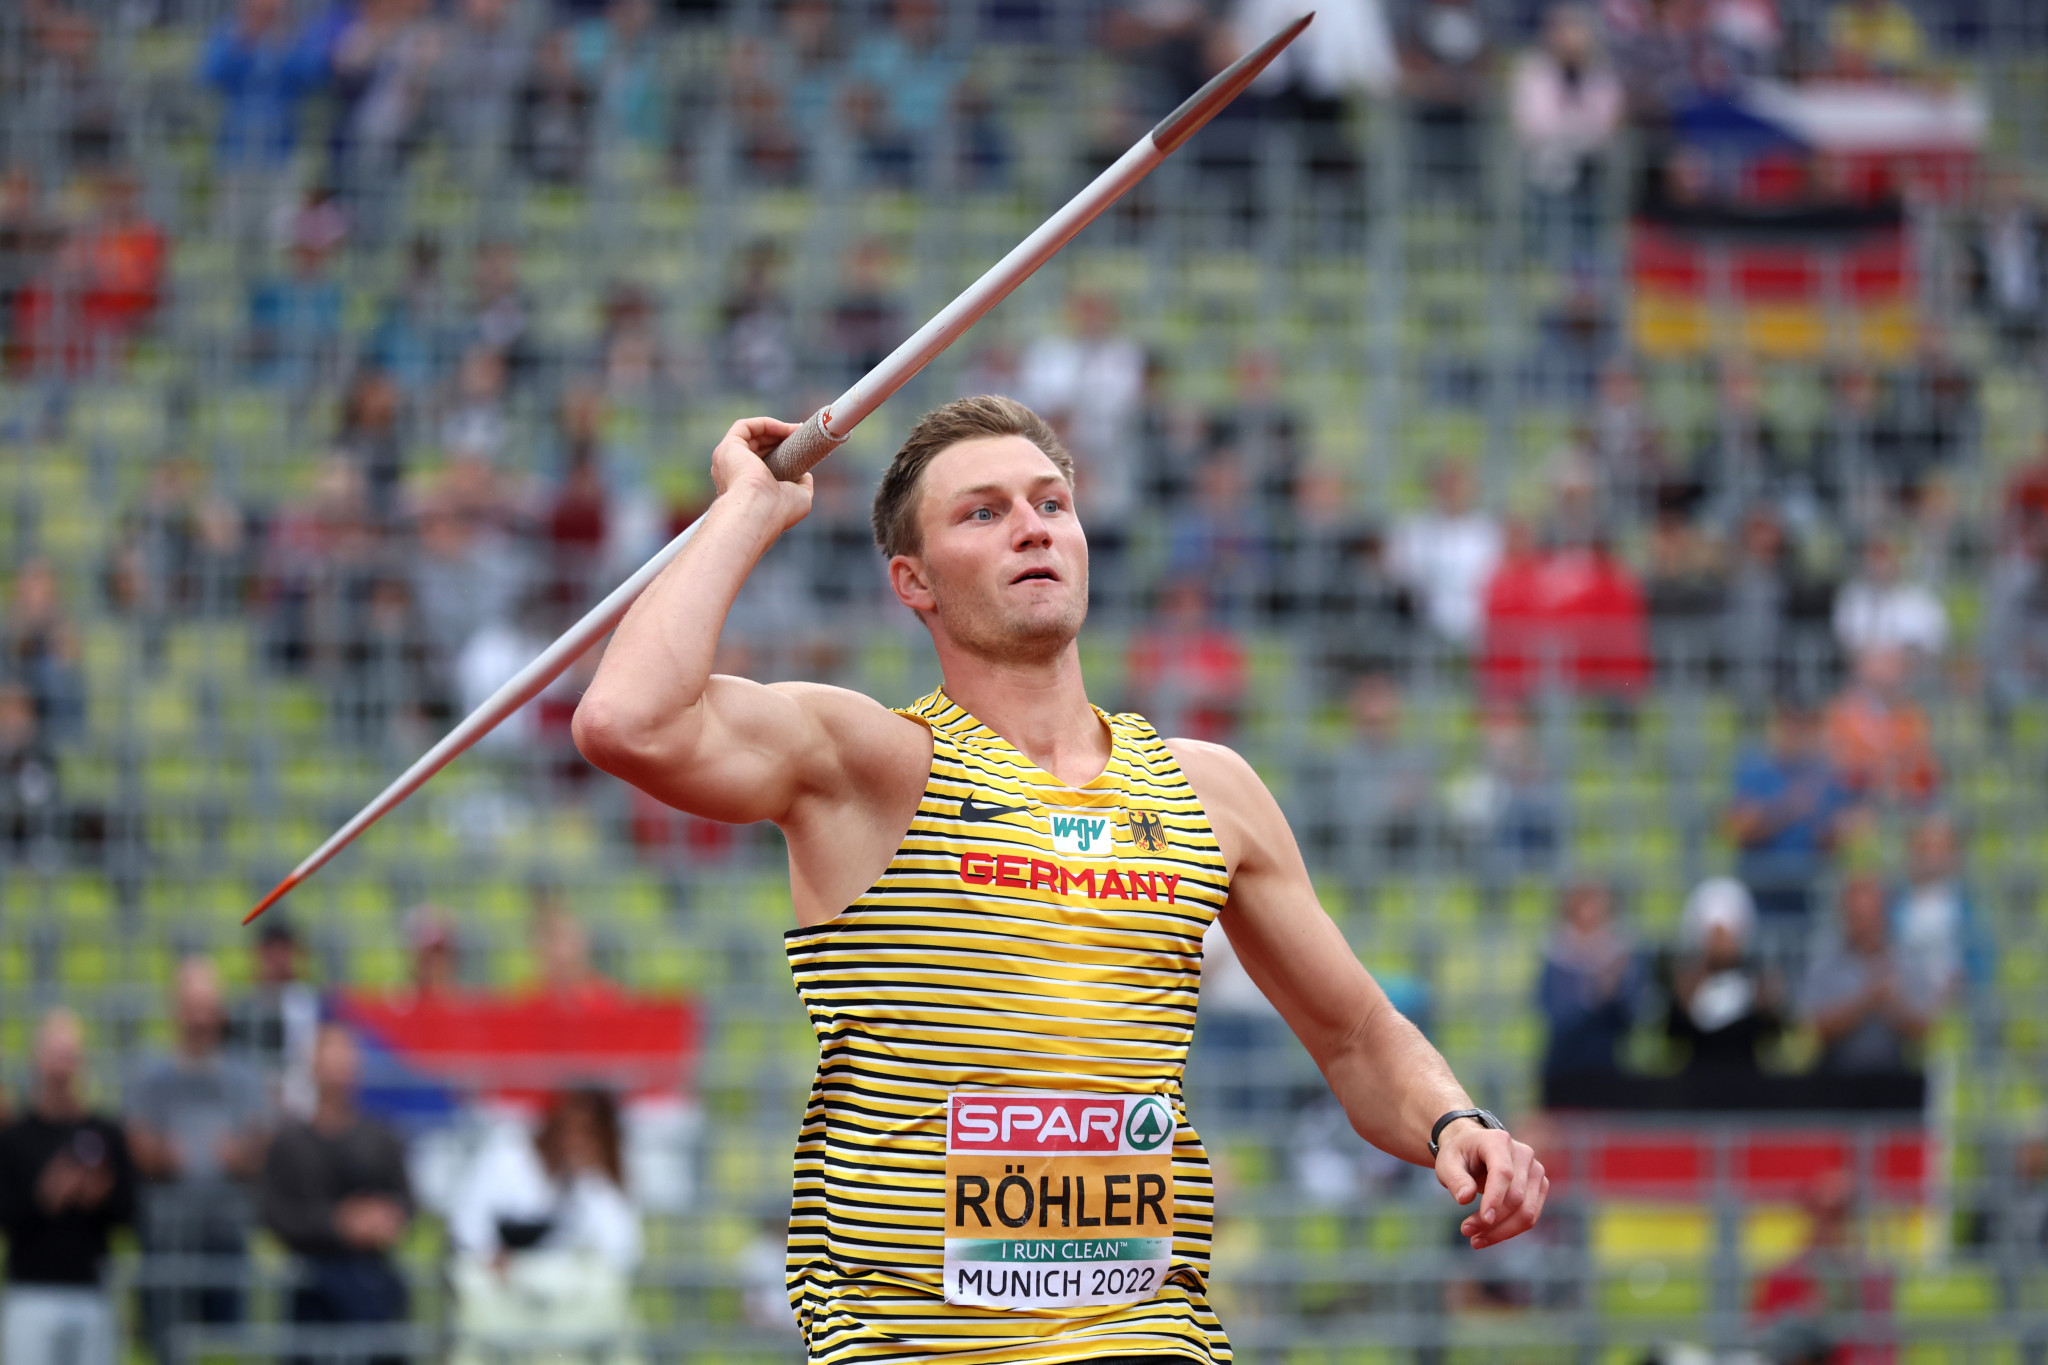 Rio 2016 Olympic javelin champion Thomas Rohler was one of 30 Team Allianz ambassadors at the event in Munich ©Getty Images